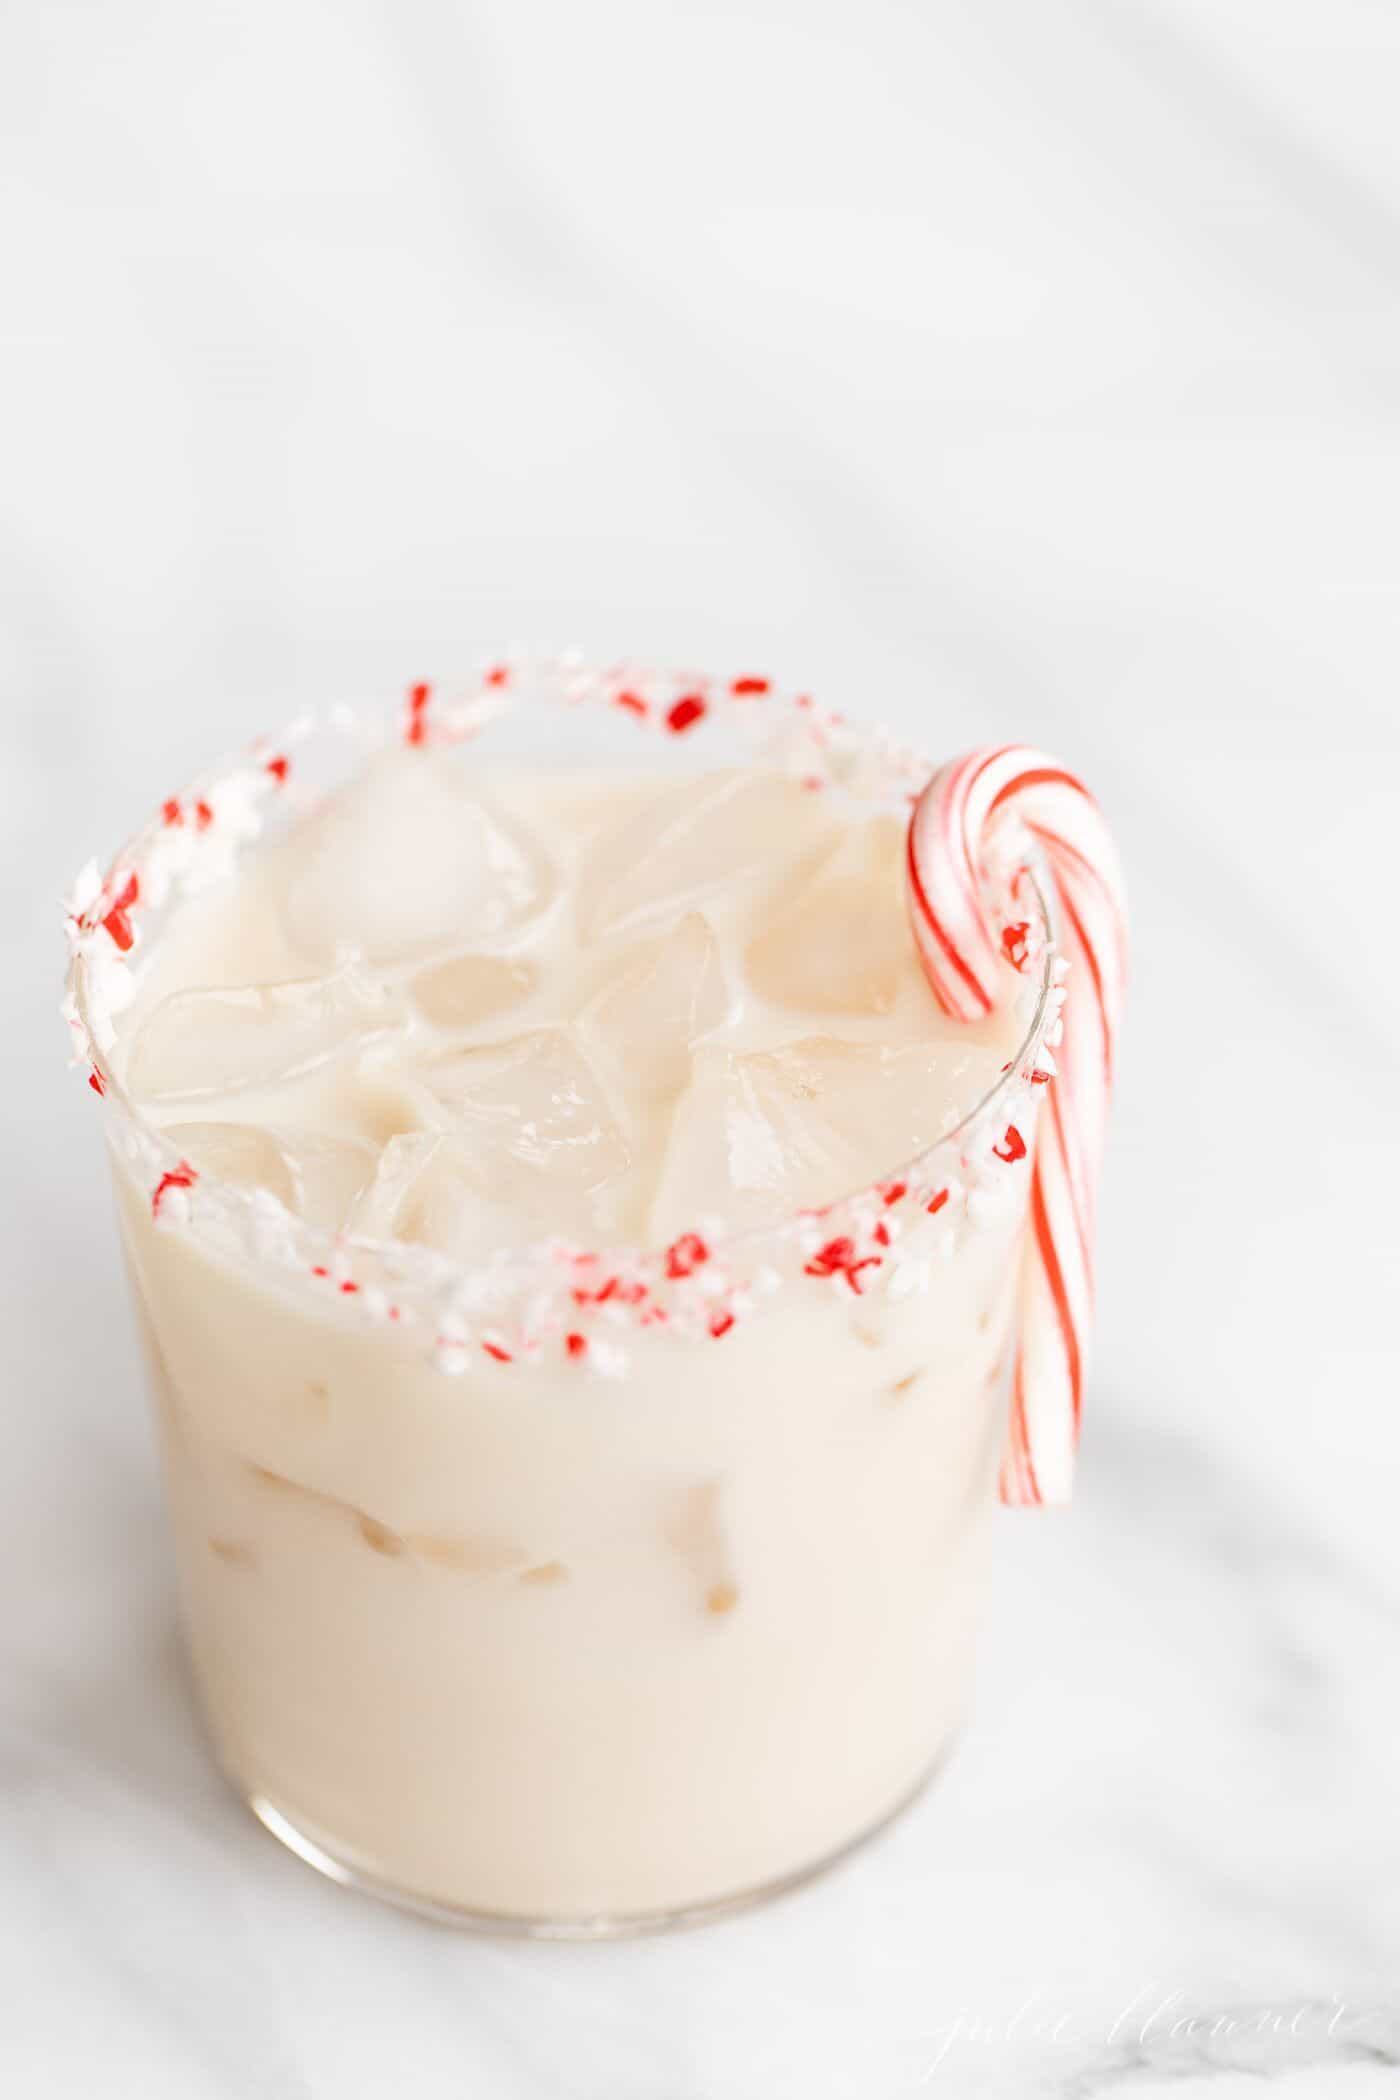 A clear glass full of a peppermint Christmas cocktail on a marble surface.